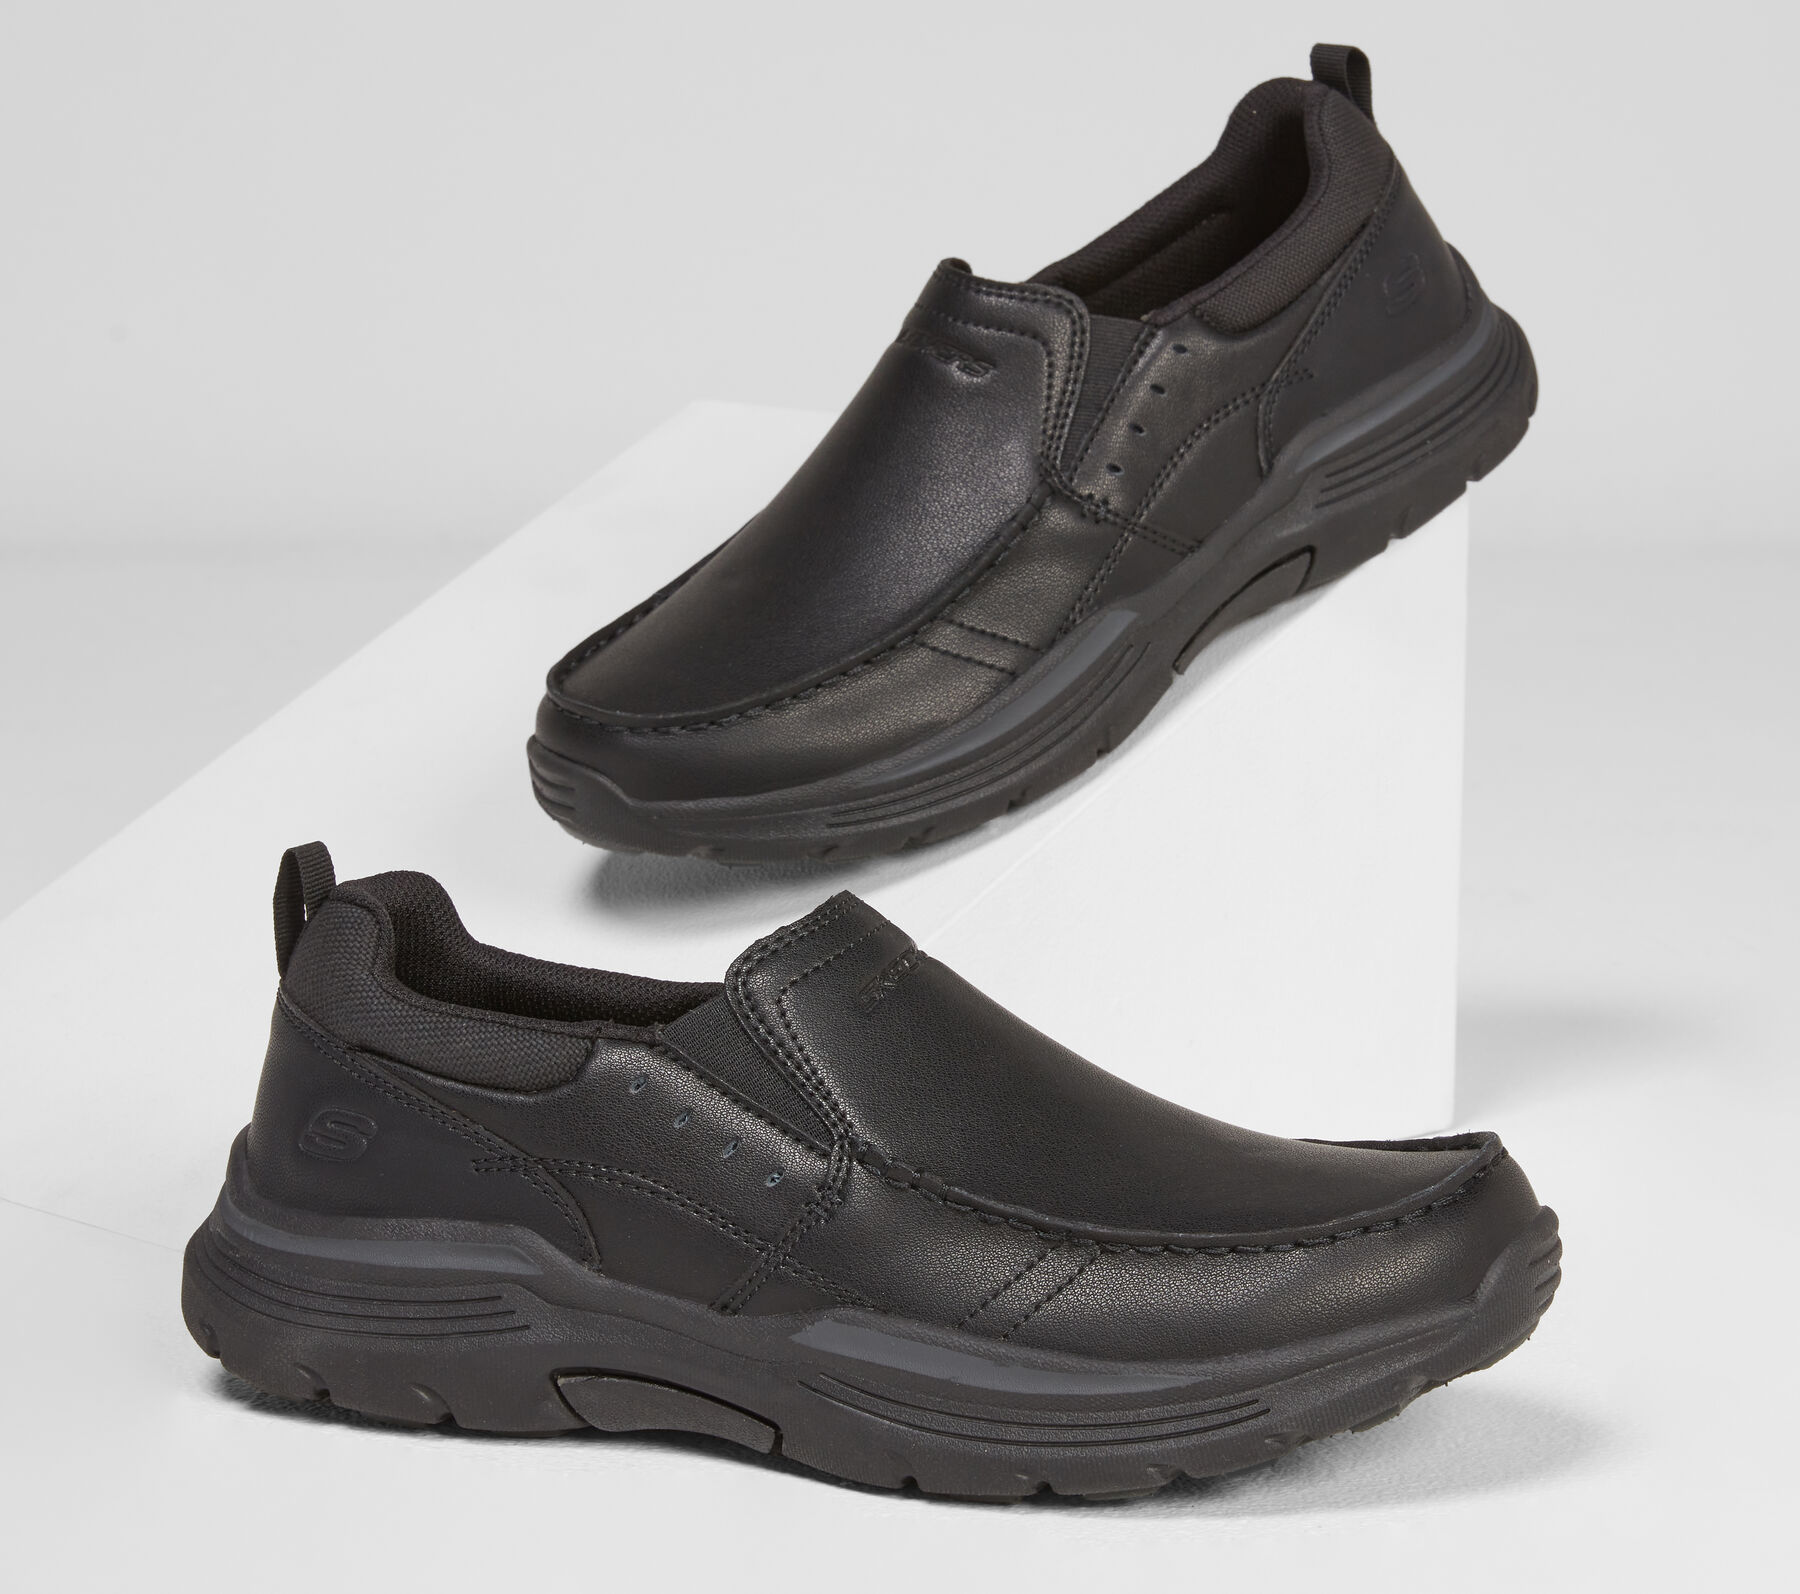 Shop the Relaxed Fit: Expended - Seveno | SKECHERS